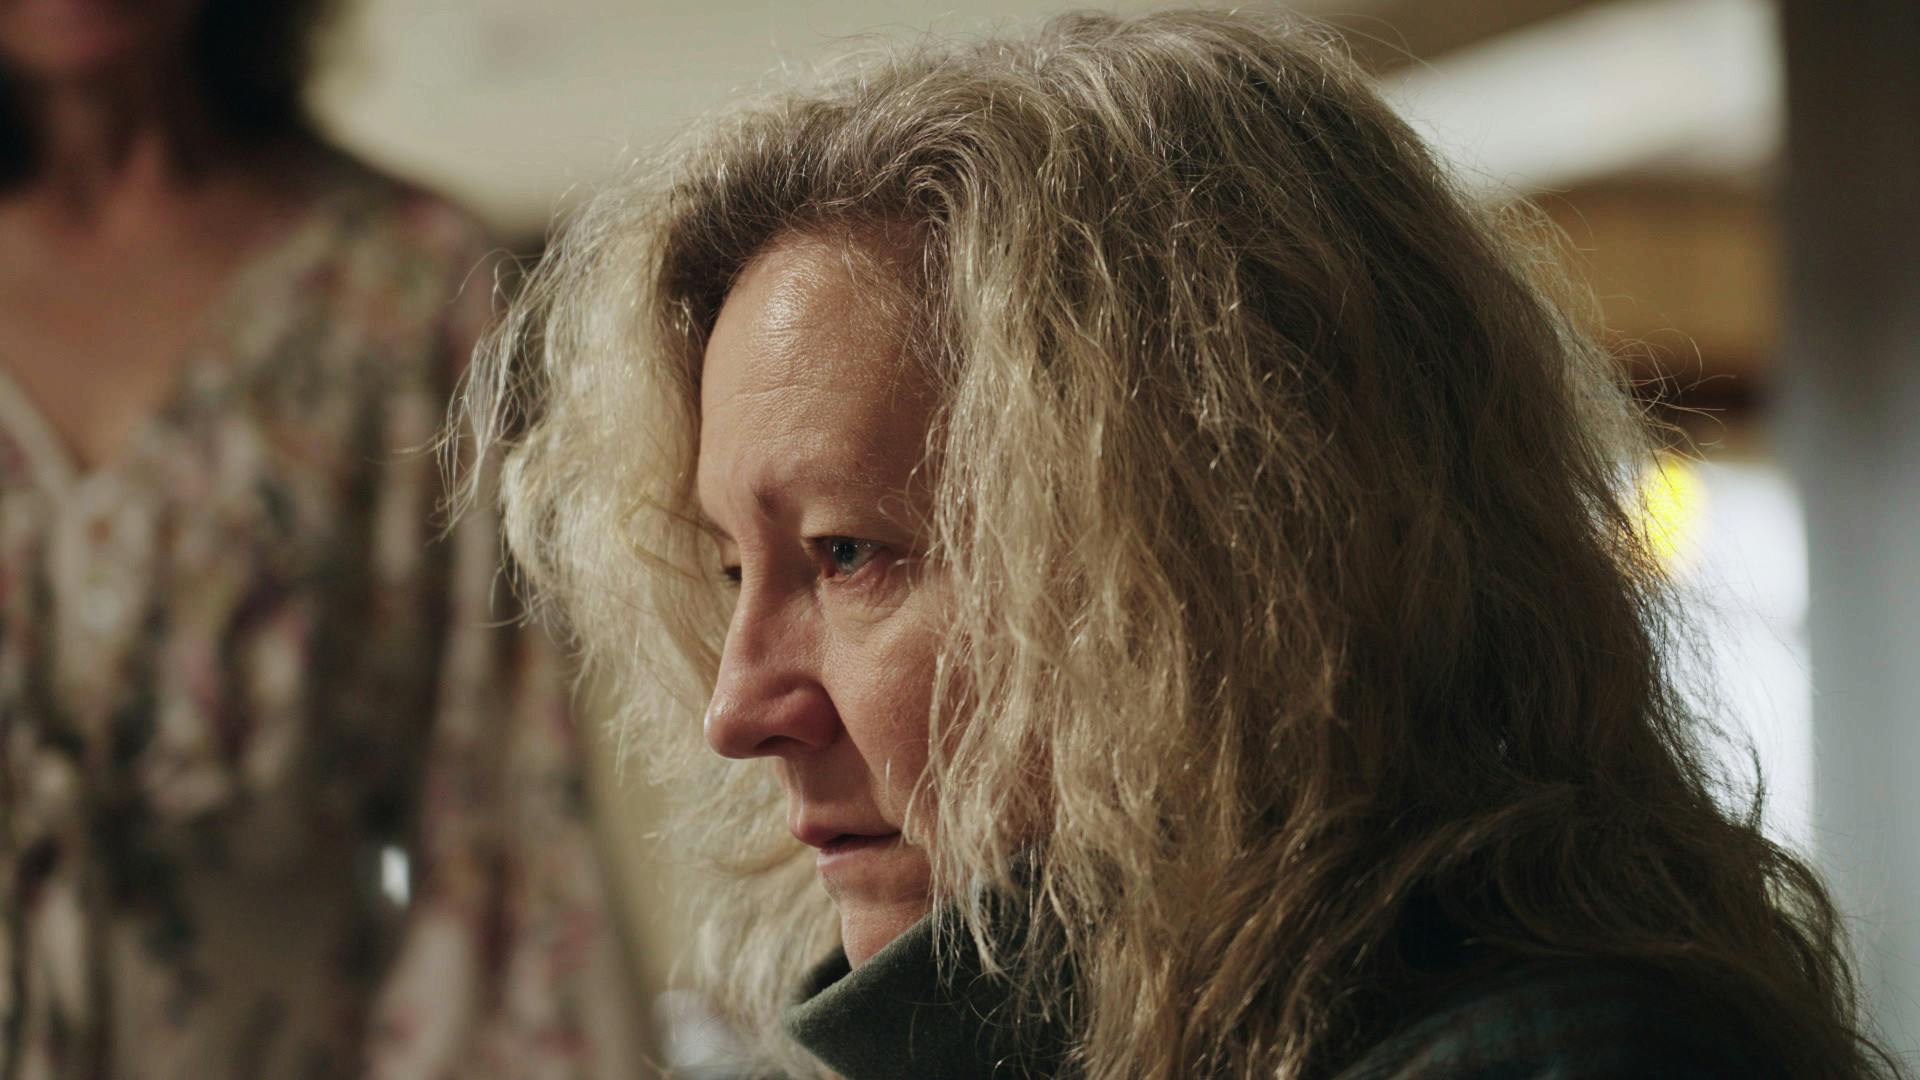 Still from The Bereaved